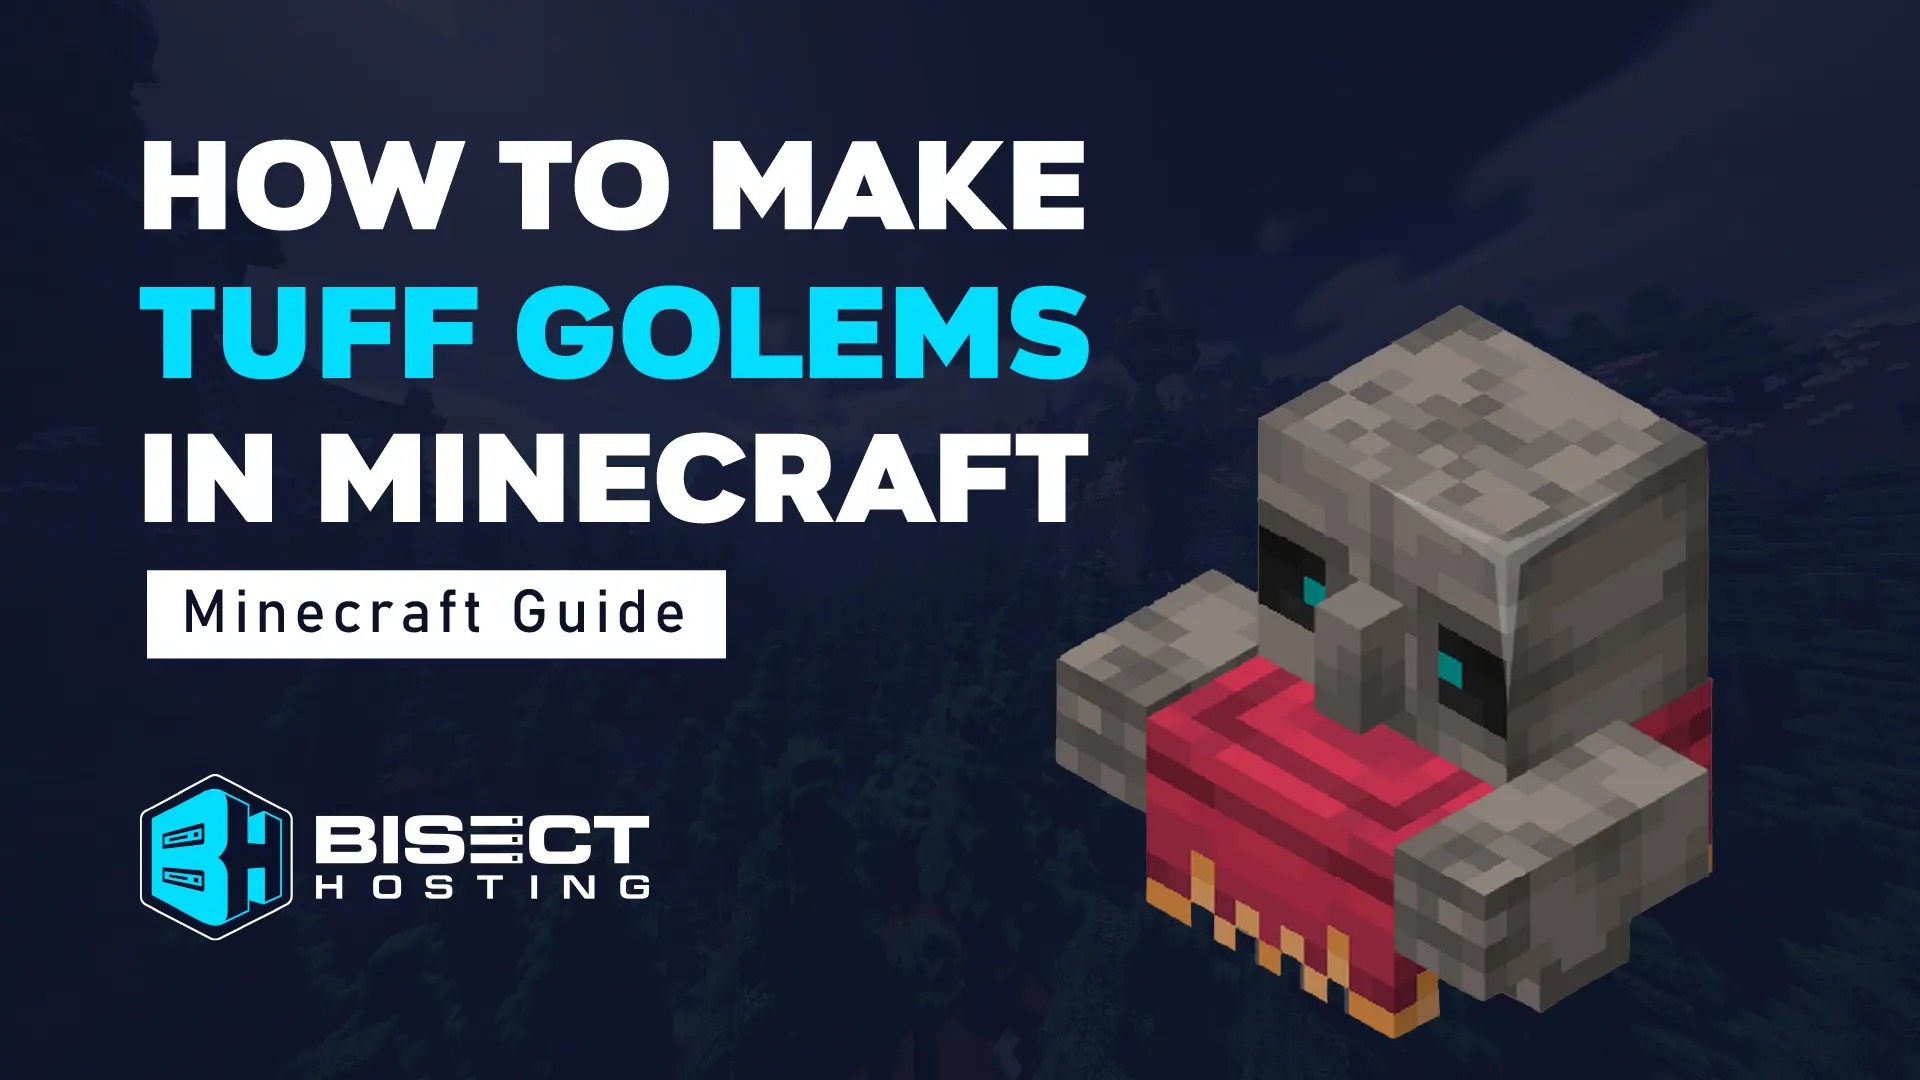 How to Make Tuff Golems in Minecraft